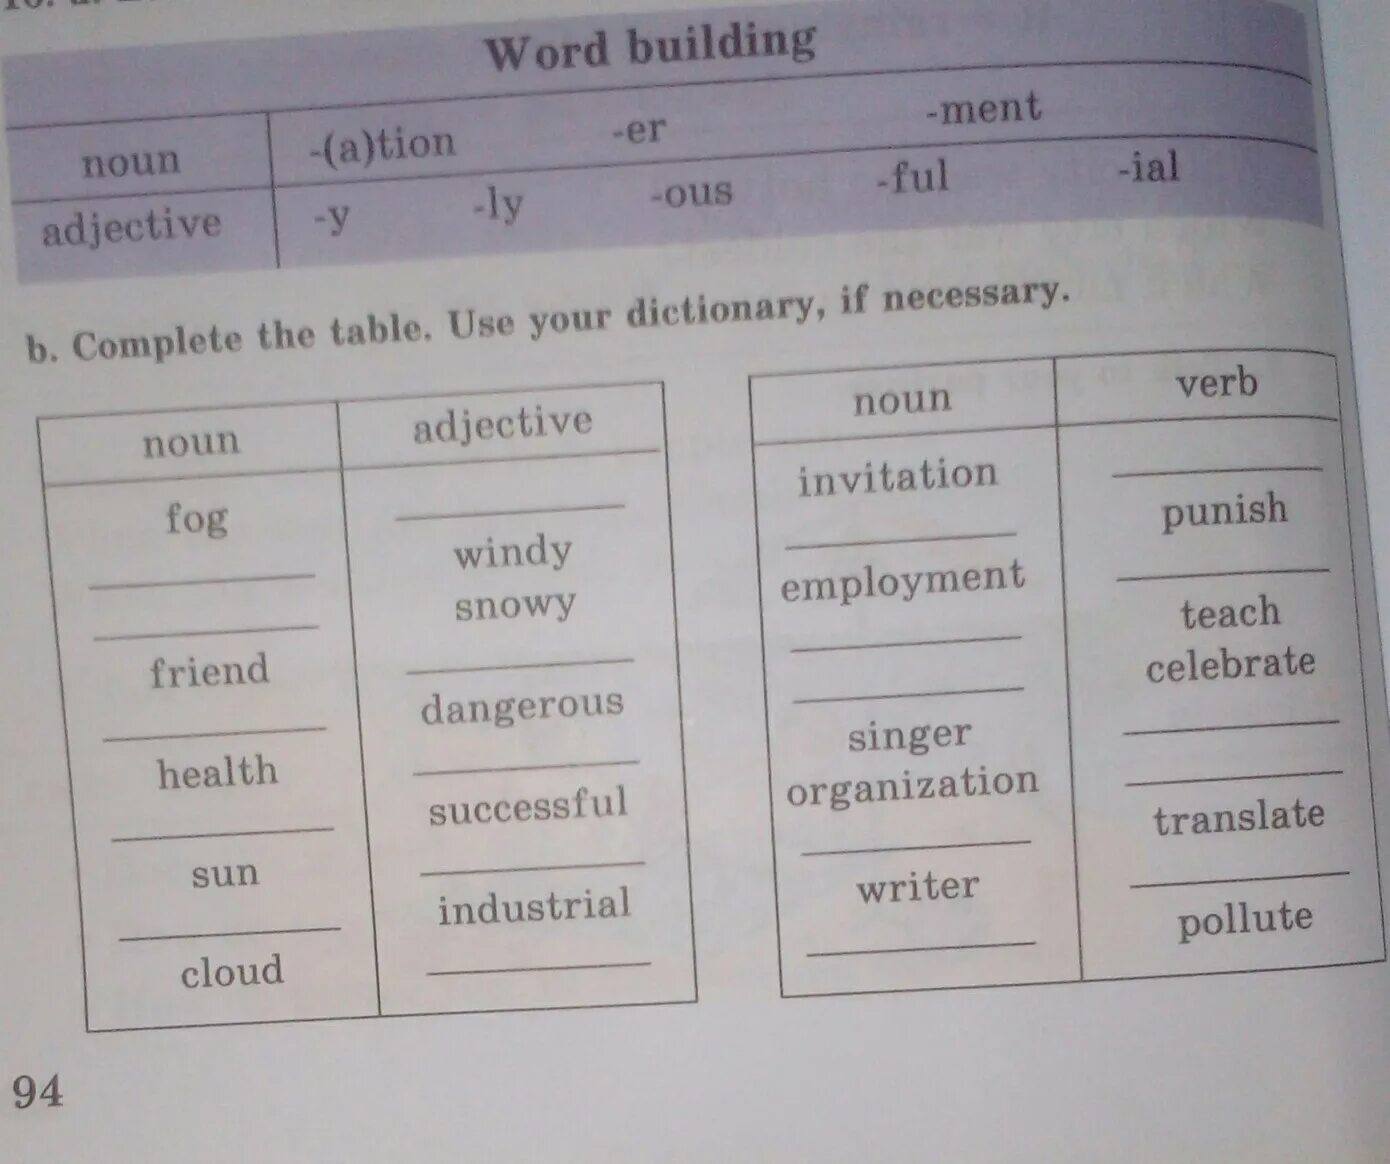 Complete the Table таблица. Word building таблица. Word building правила. Word building in English таблица.